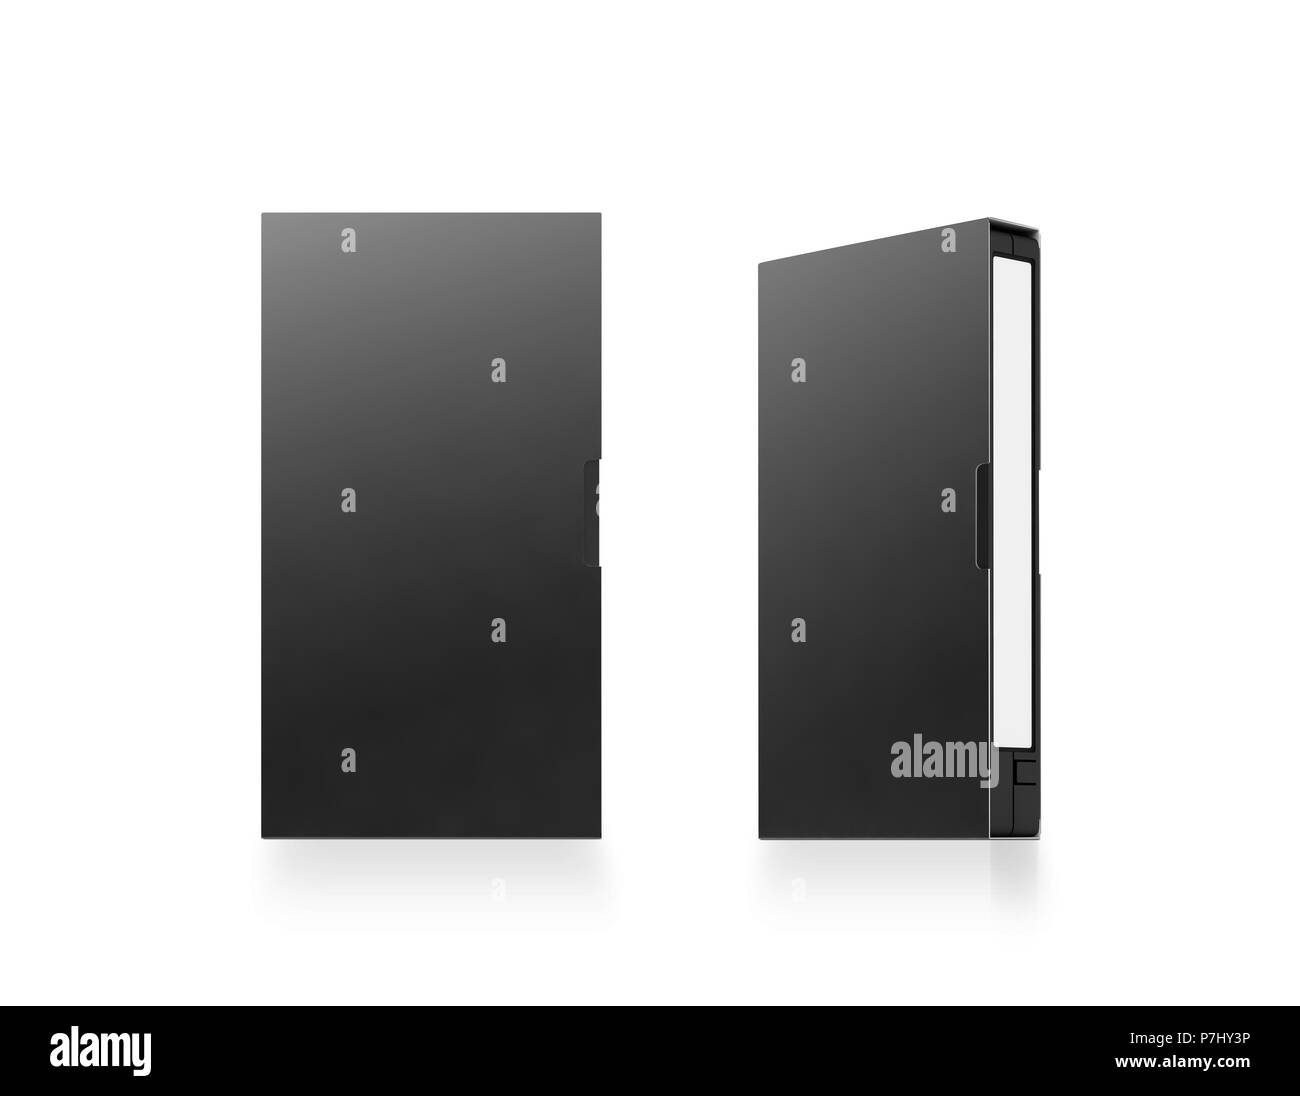 Download Blank Black Video Cassette Tape Box Mockup Isolated 3d Rendering Clipping Path Clear Vhs Cassete Case Design Mock Up Retro Tv Videotape Cover Tem Stock Photo Alamy